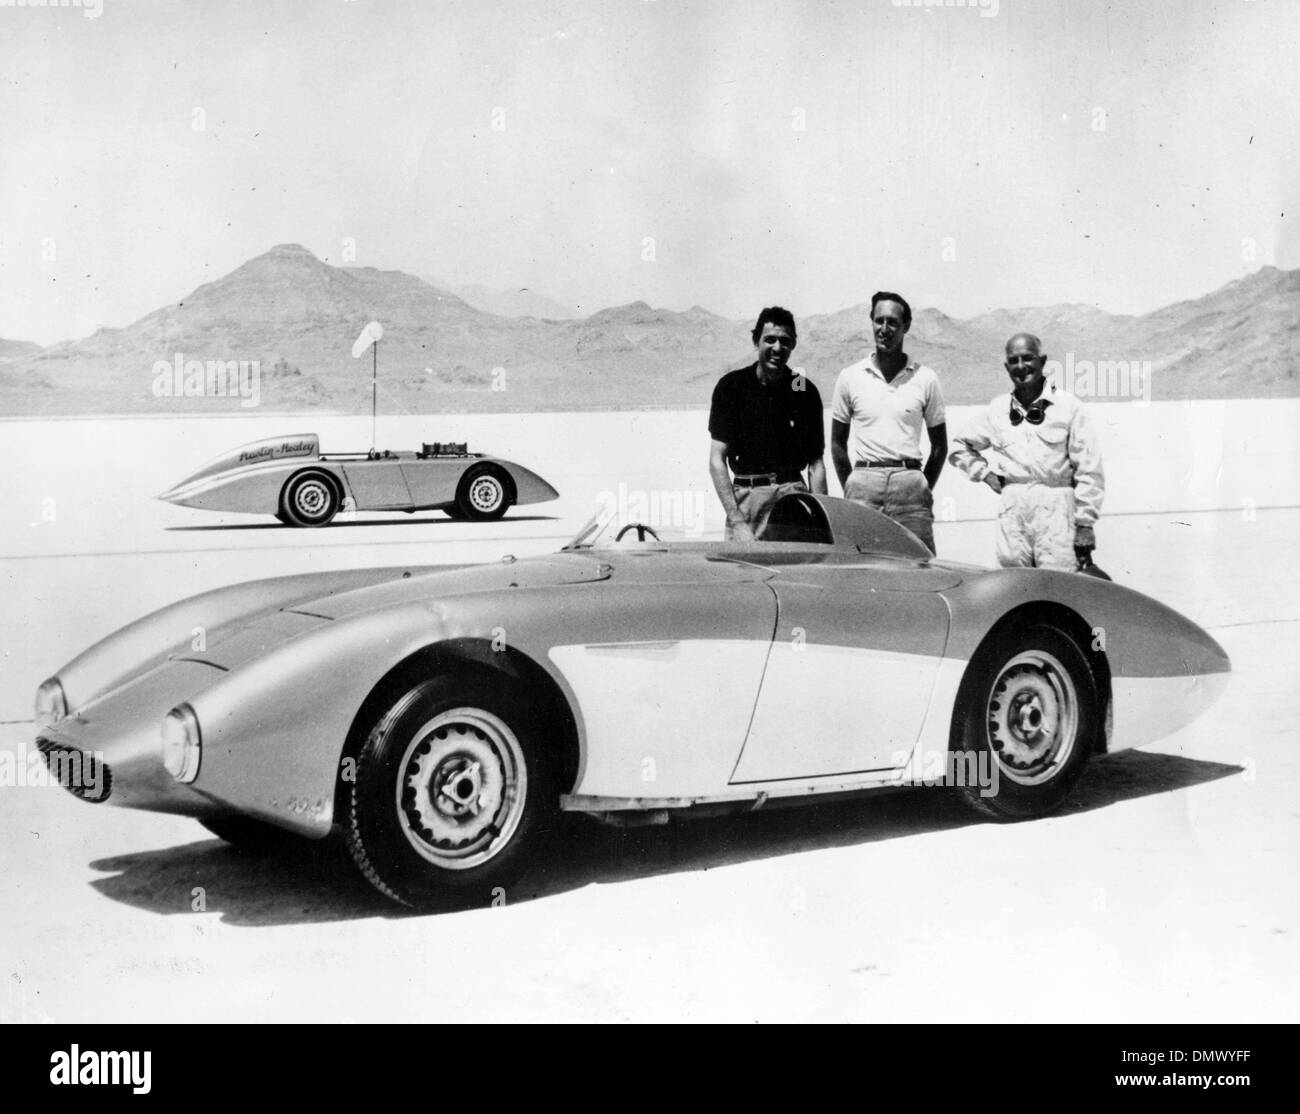 Aug. 17, 1956 - Bonneville, UT, USA - CAROLL SHELBY of Dallas, ROY JACKSON-MOORE of Los Angeles and Mr. DONALD HEALEY, with the car after setting the new records at the Bonneville Salt Flats in Utah, U.S.A.. The car in the background is another Austin Healey in which further record attempts may be made at Bonneville.  (Credit Image: © KEYSTONE Pictures USA/ZUMAPRESS.com) Stock Photo